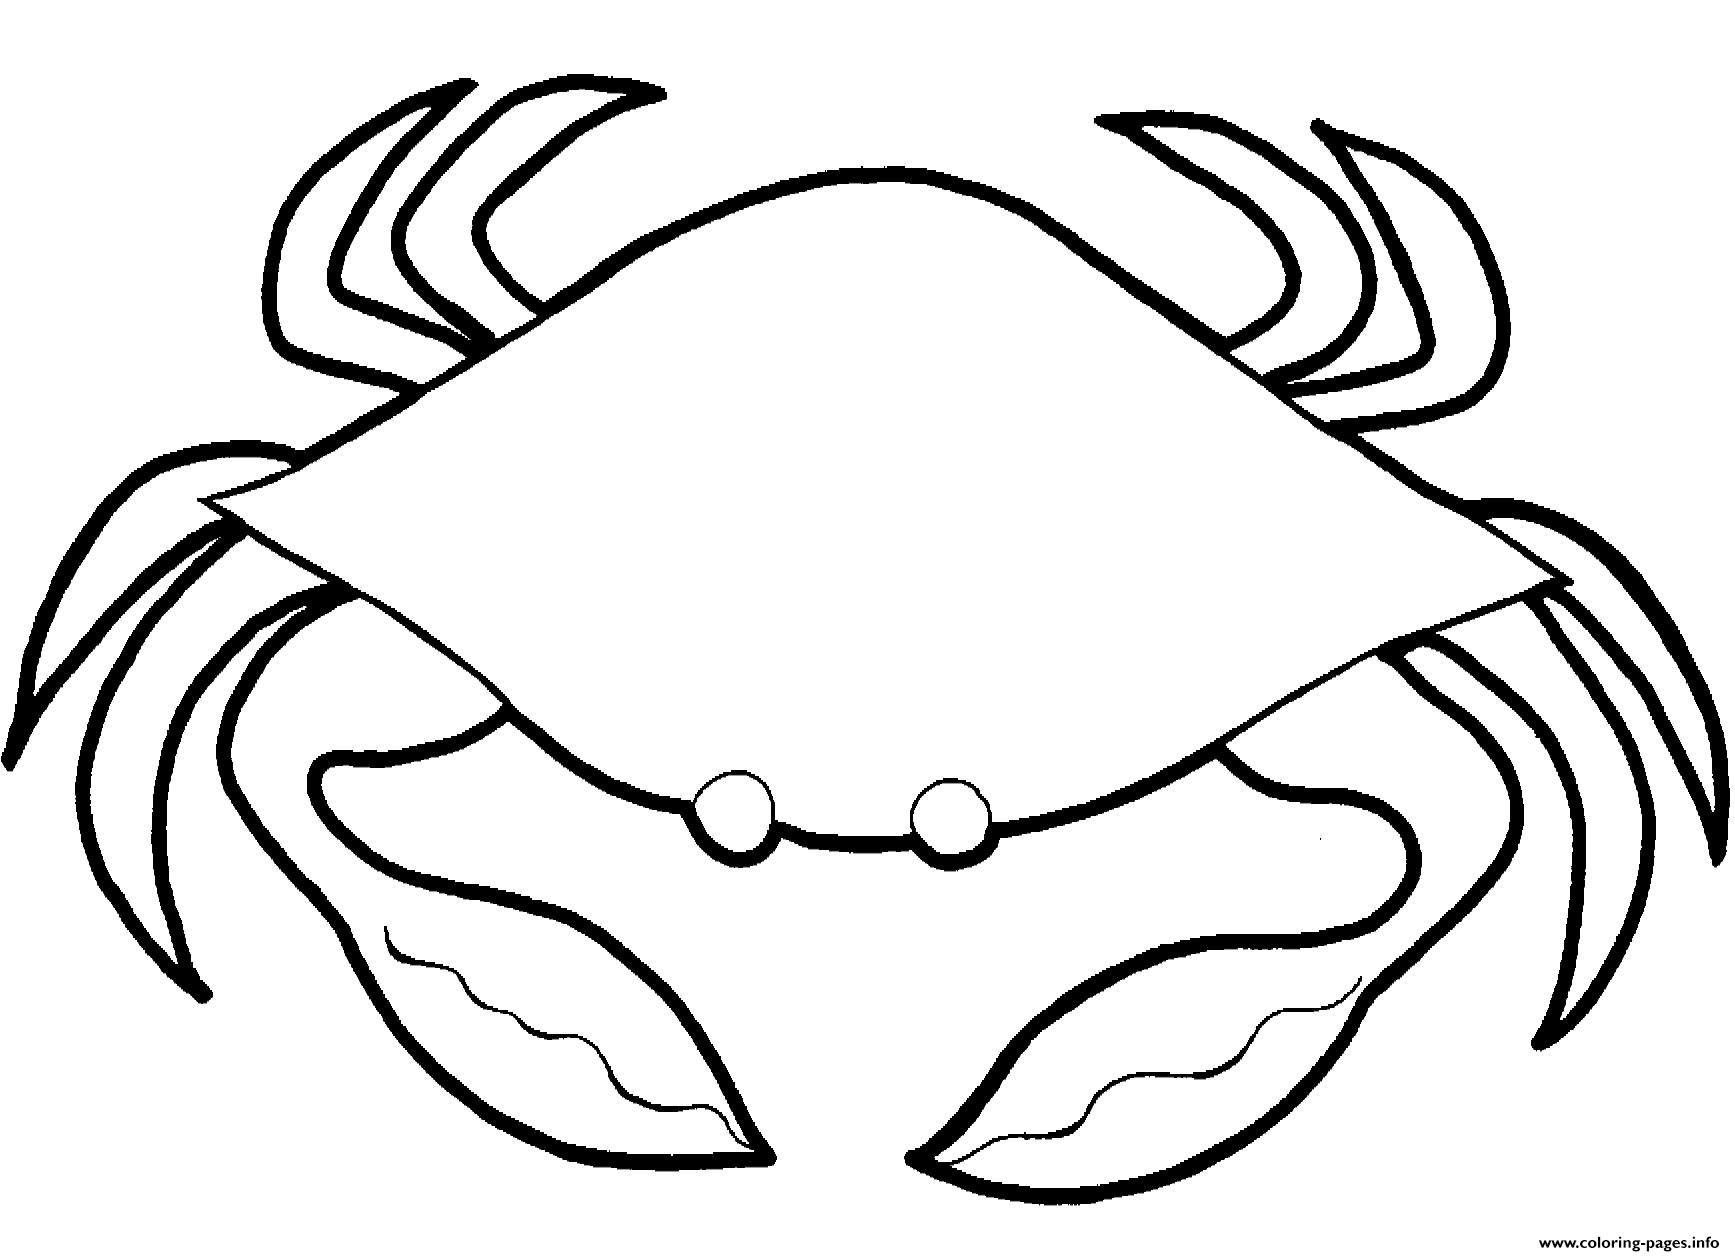 Coloring Pages Of Sea Animals Crab0dd3 coloring